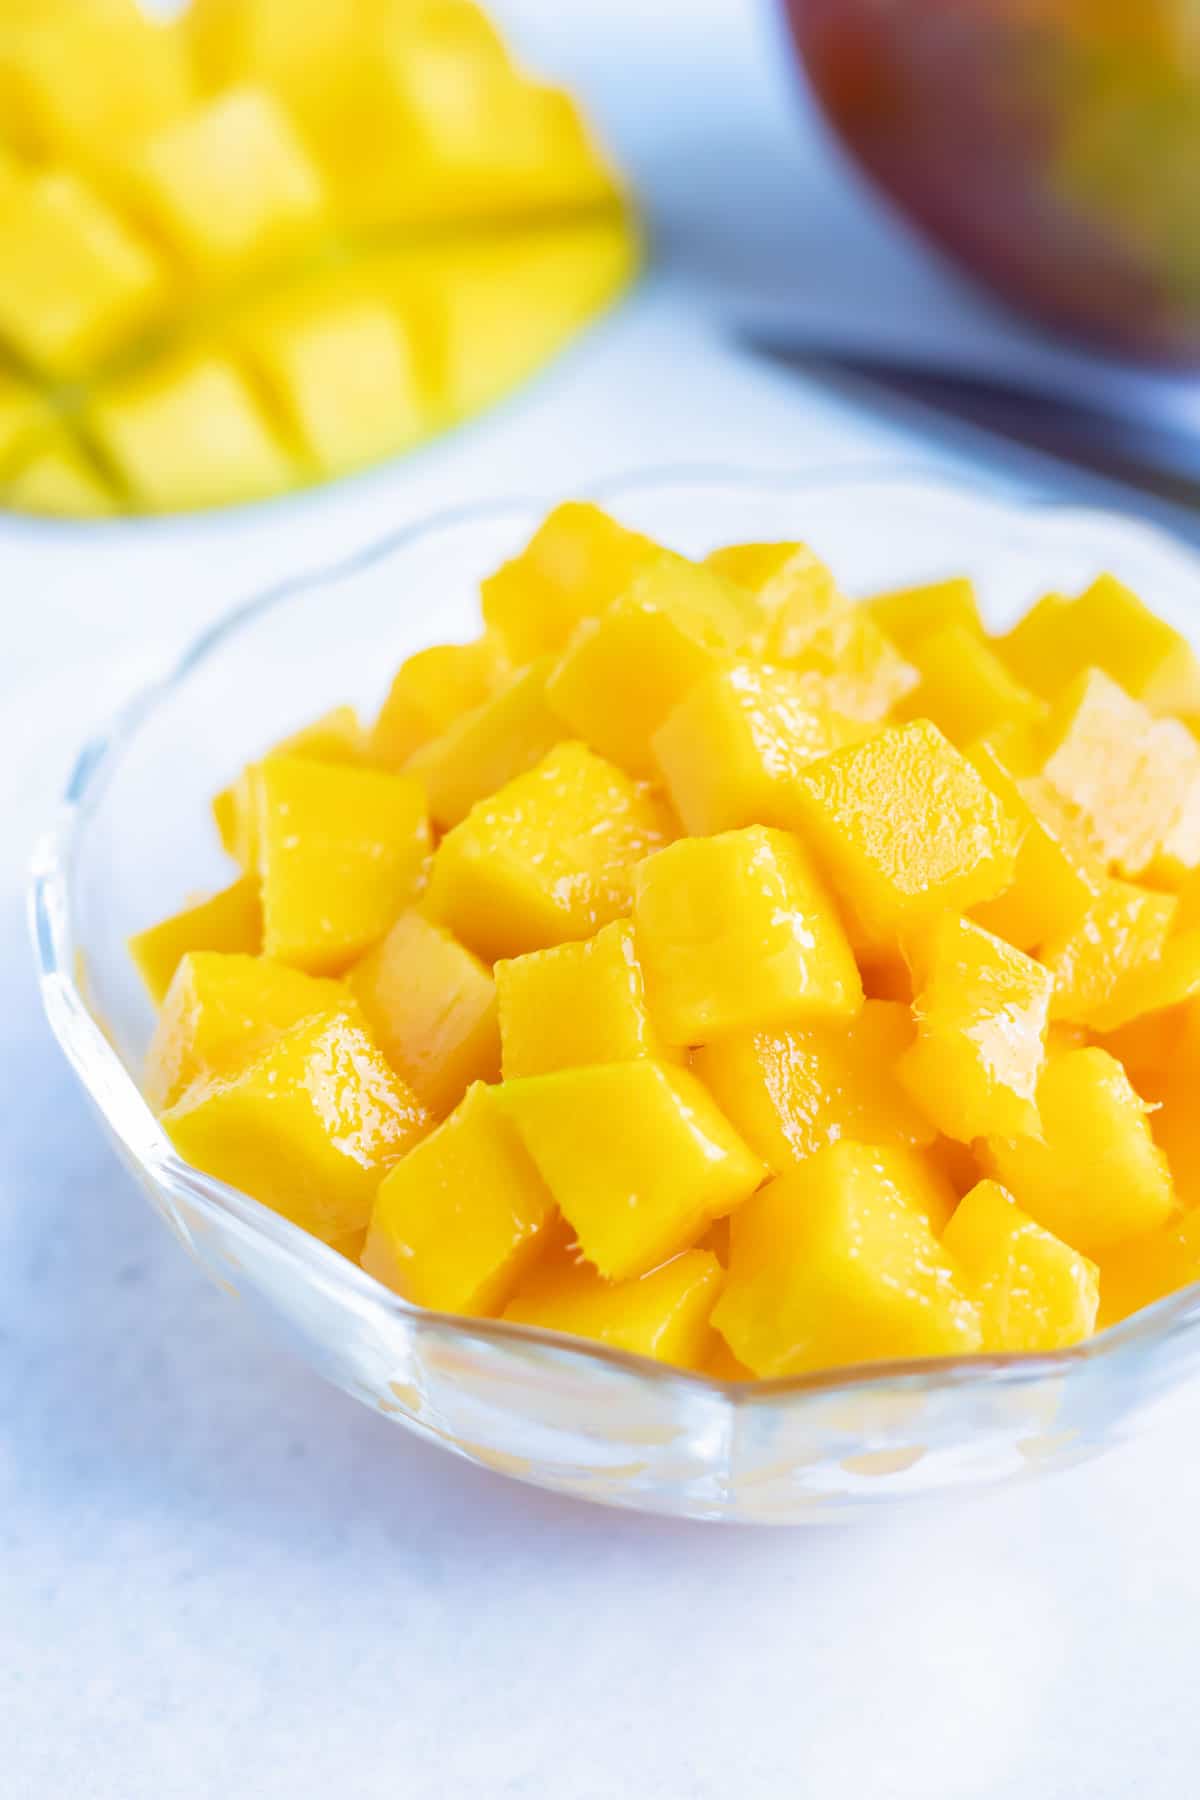 A glass bowl full of cut and diced ripened mango.